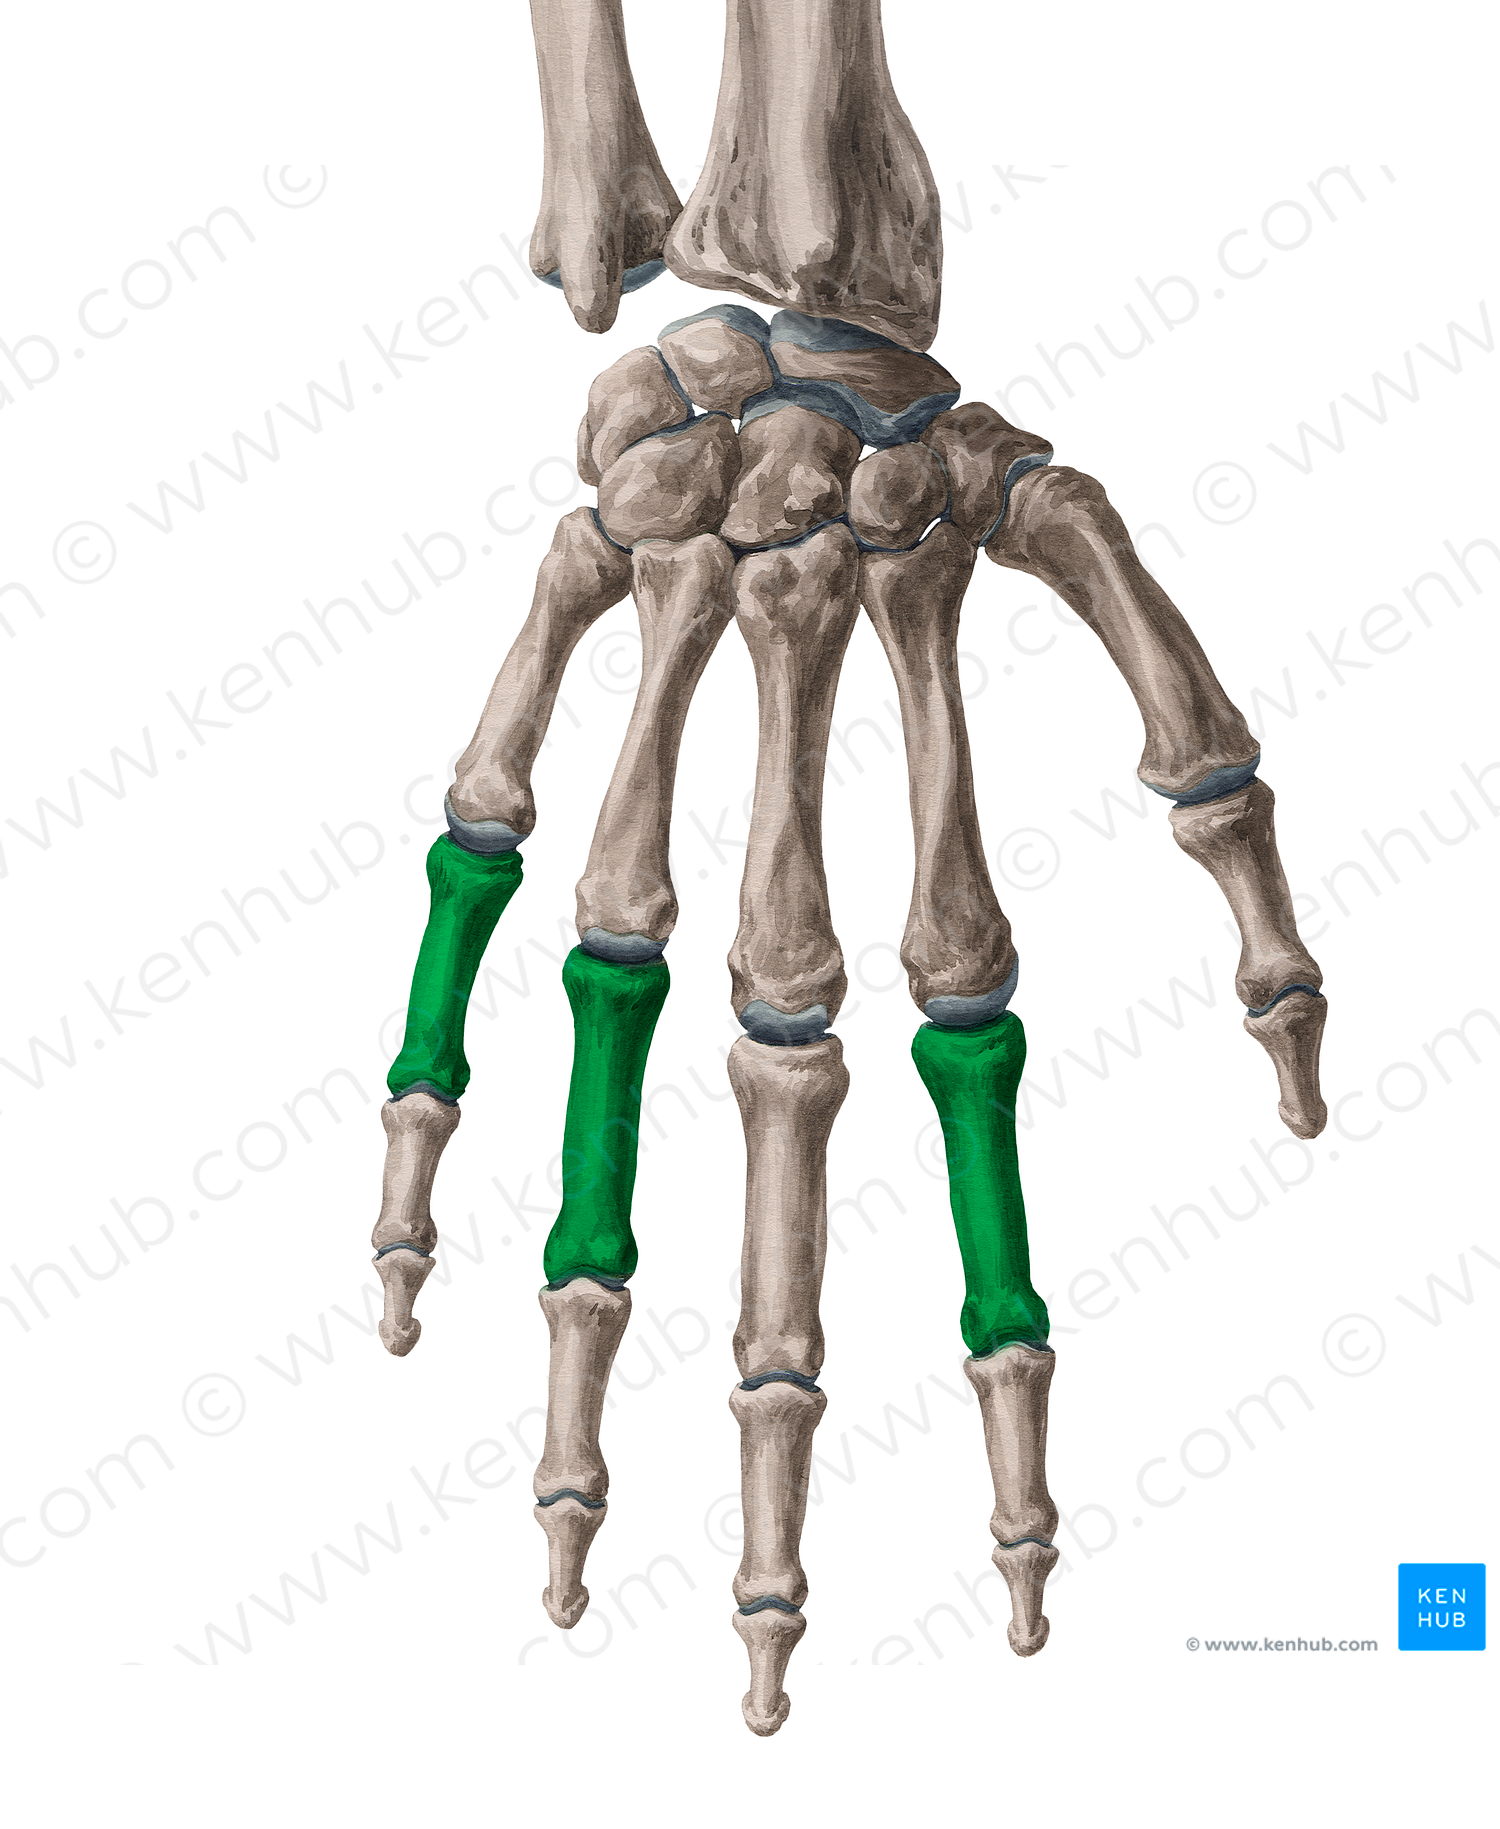 Proximal phalanges of 2nd, 4th & 5th fingers (#18598)